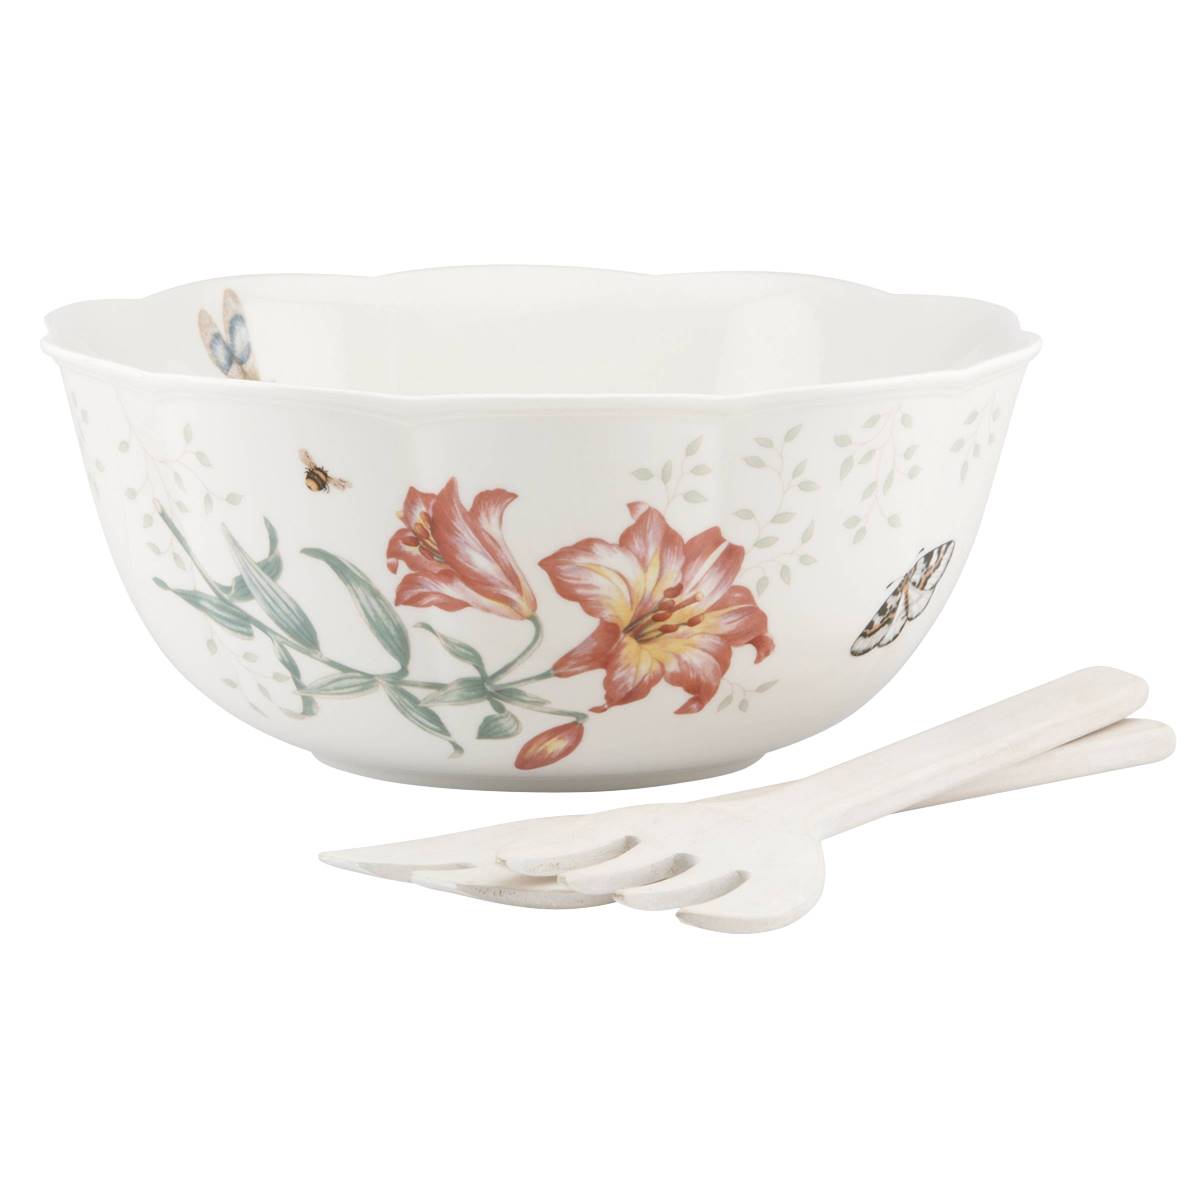 Lenox(R) Butterfly Meadow(tm) Salad Bowl And Servers